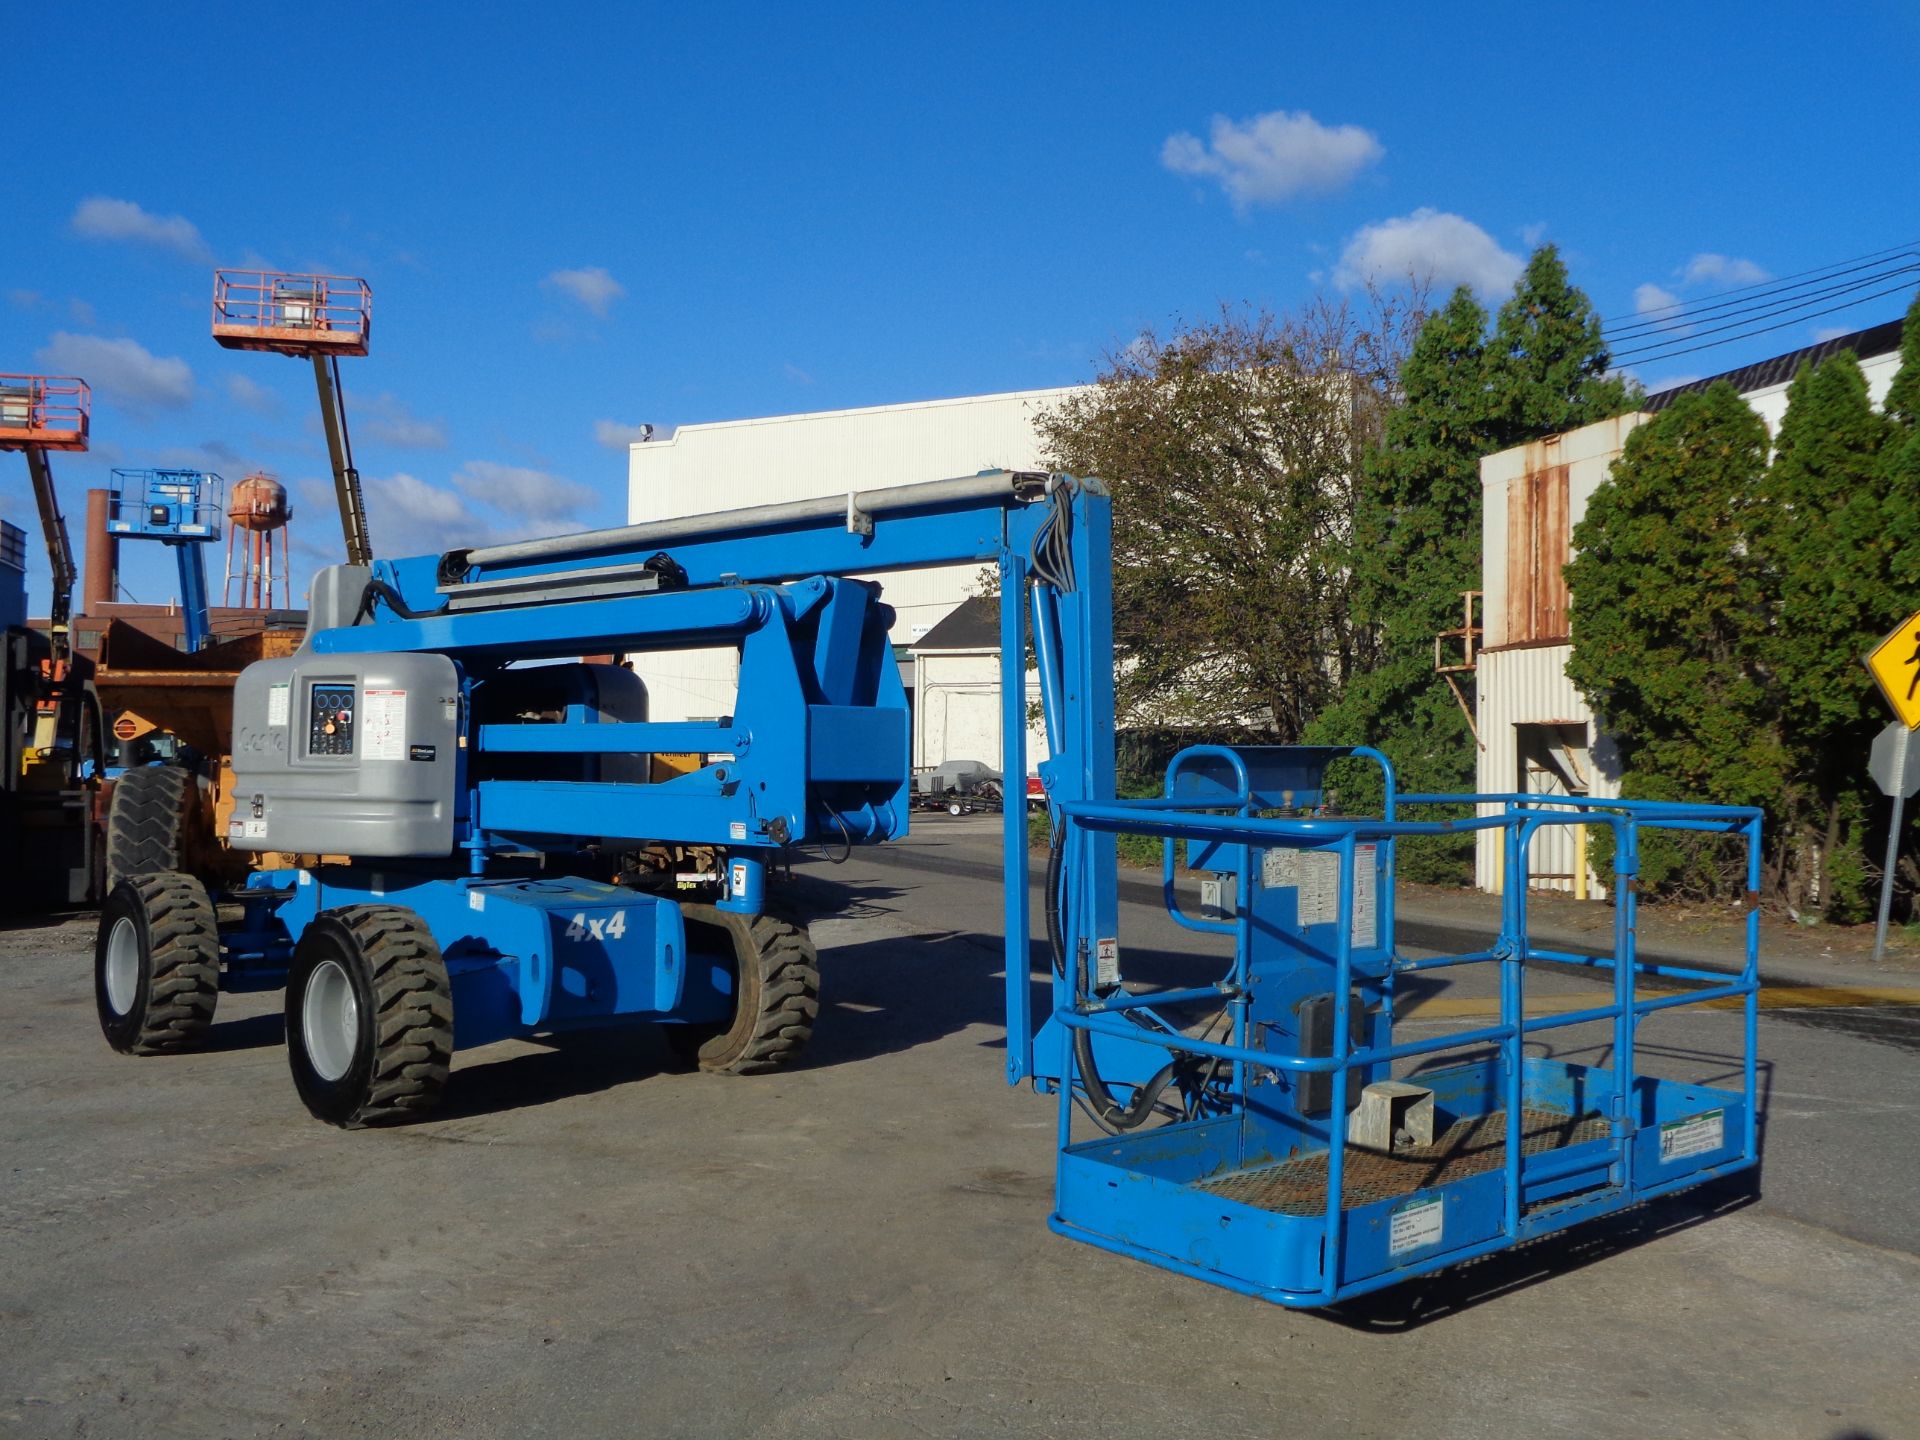 Genie Z60/34- Boom Man Aerial Lift - 4X4 - 60Ft Height - Image 14 of 18